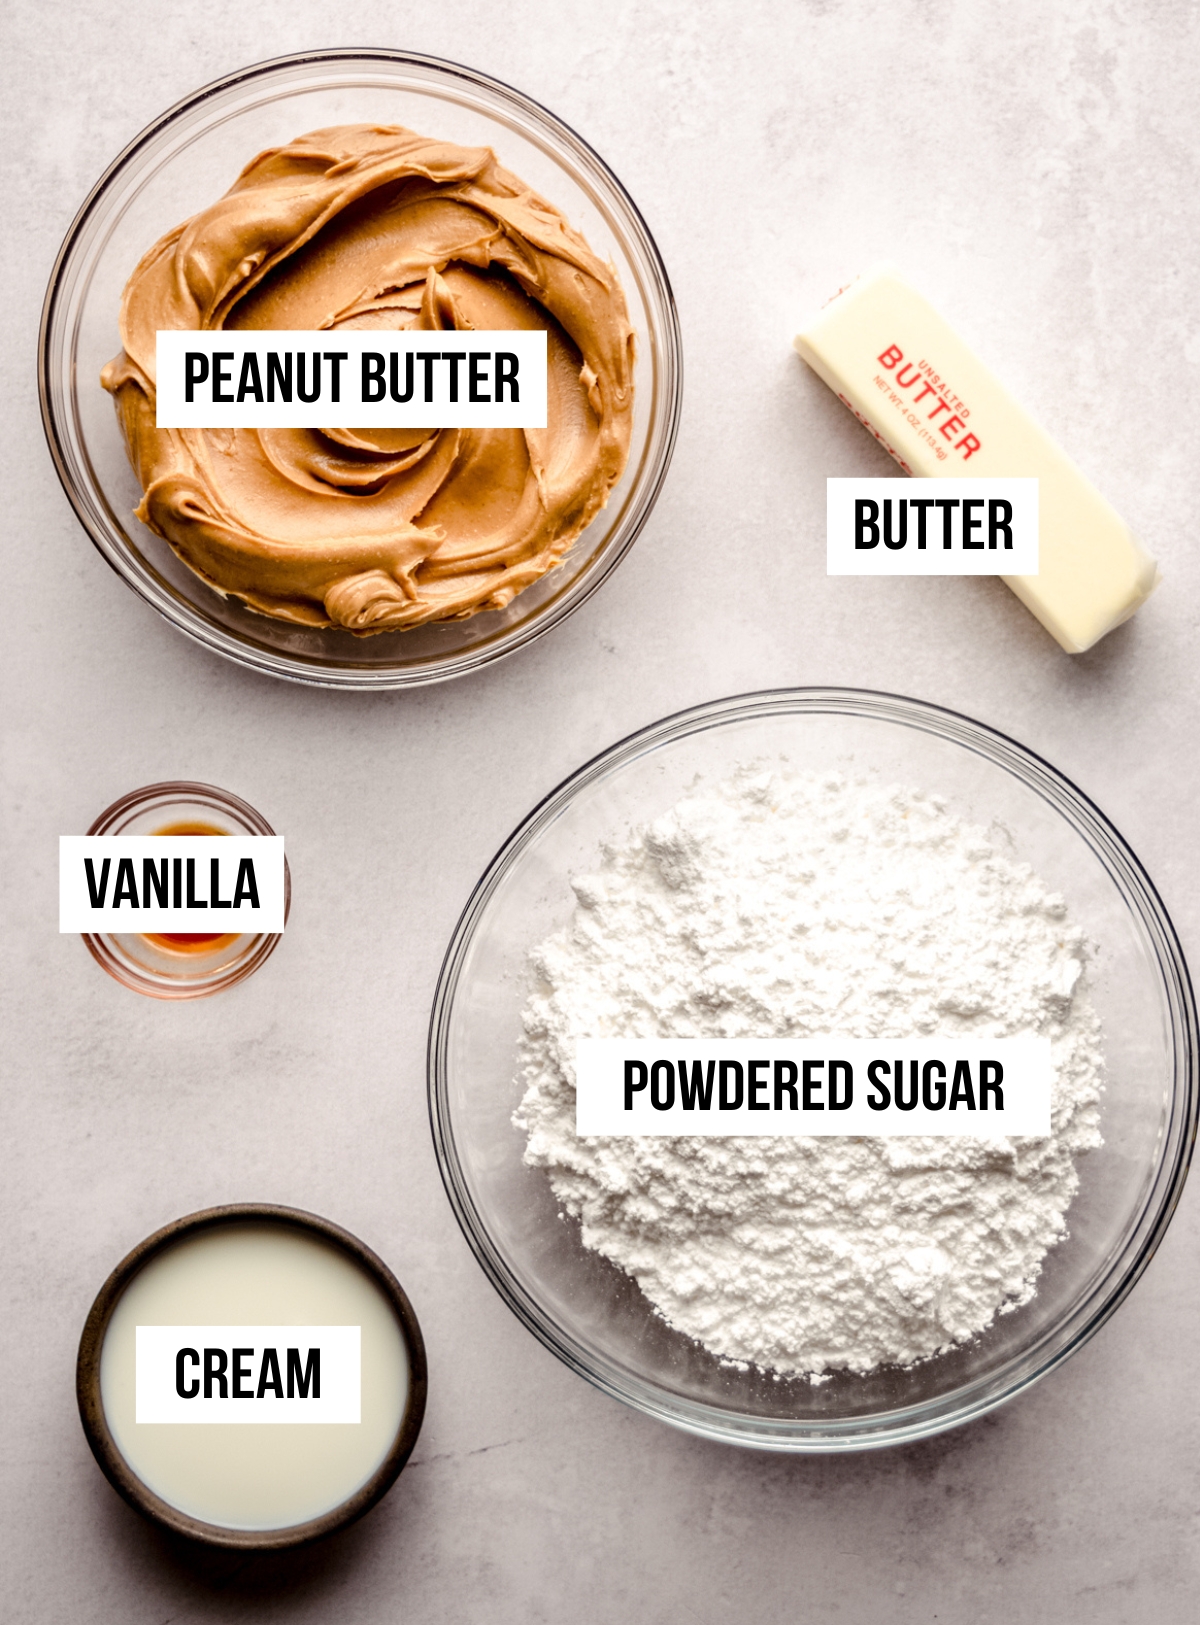 Aerial photo of ingredients for peanut butter frosting with text overlay.